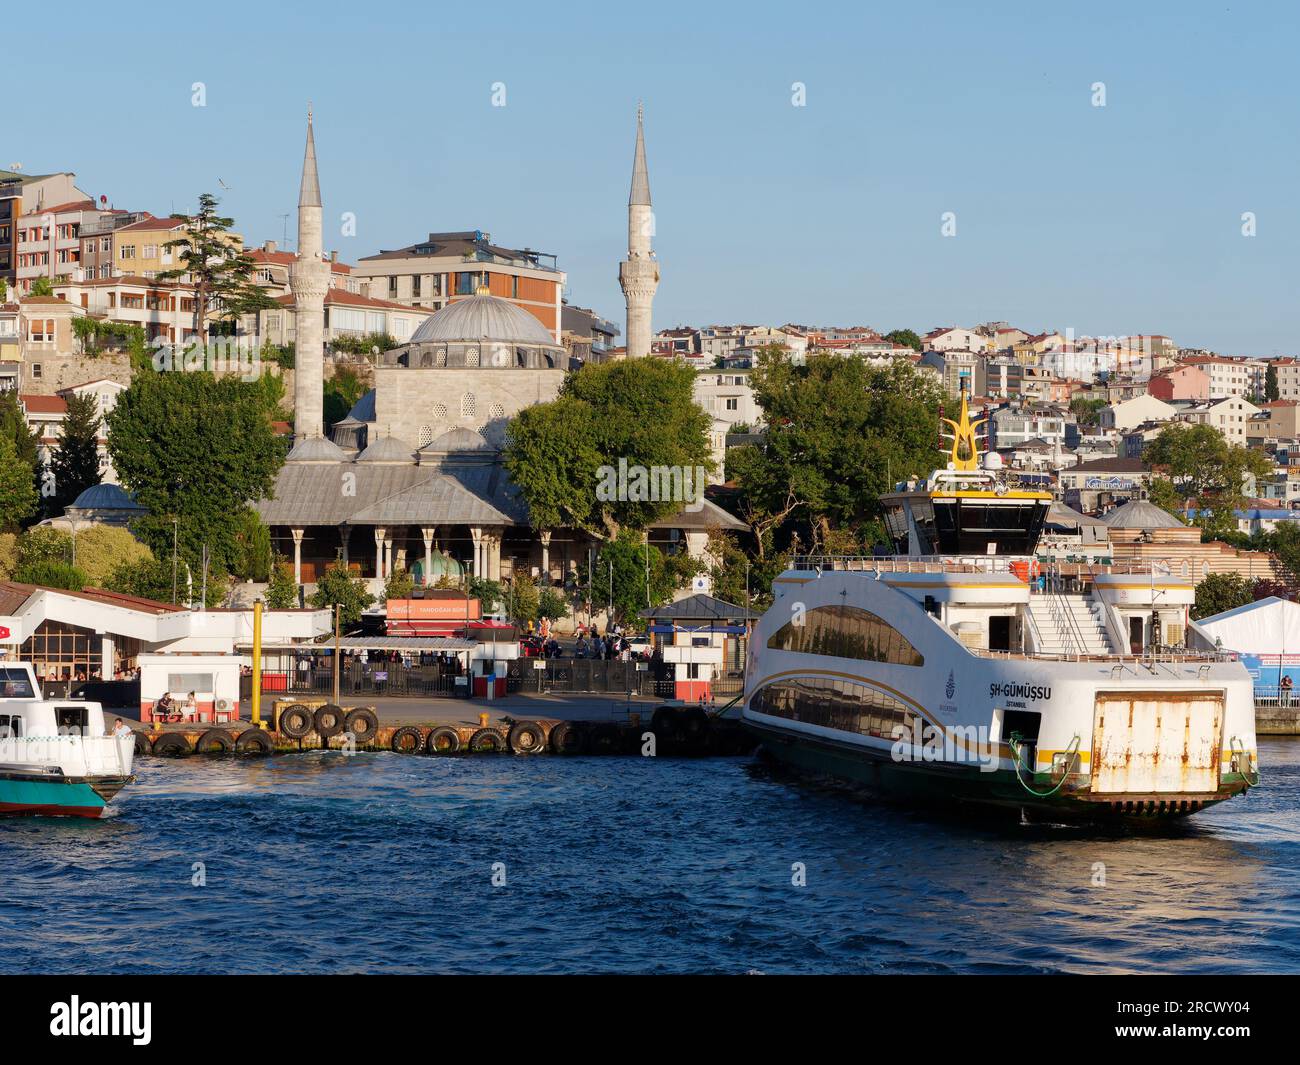 Passenger ferry docked at Uskudar on the Bosporus with the Mihrimah Sultan Mosque behind. Asian side of Istanbul, Turkey Stock Photo